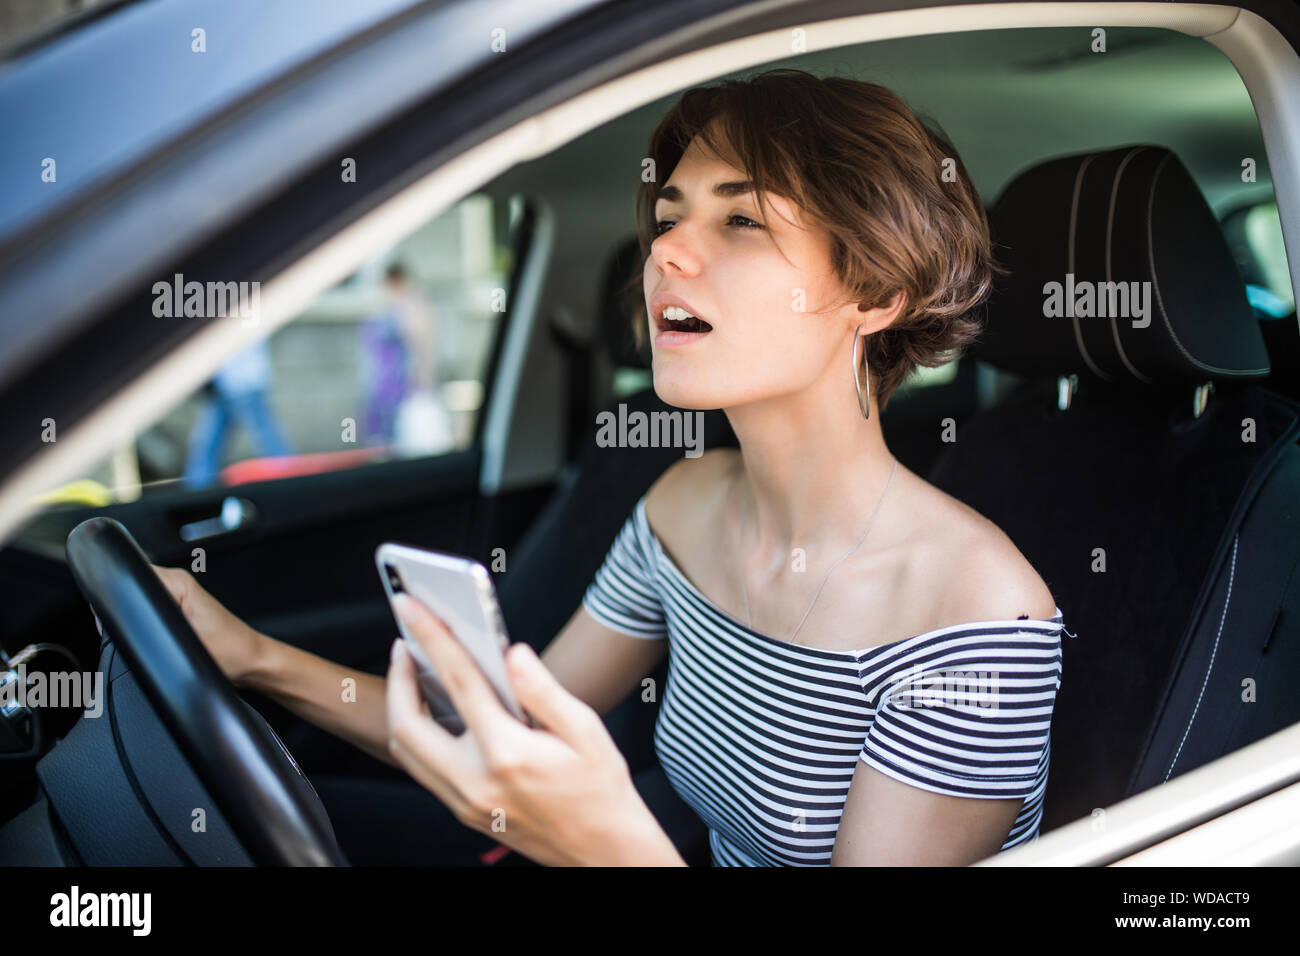 Closeup portrait, young woman driving in black car and checking her phone, annoyed by navigation gps system or bad text message or email, isolated out Stock Photo